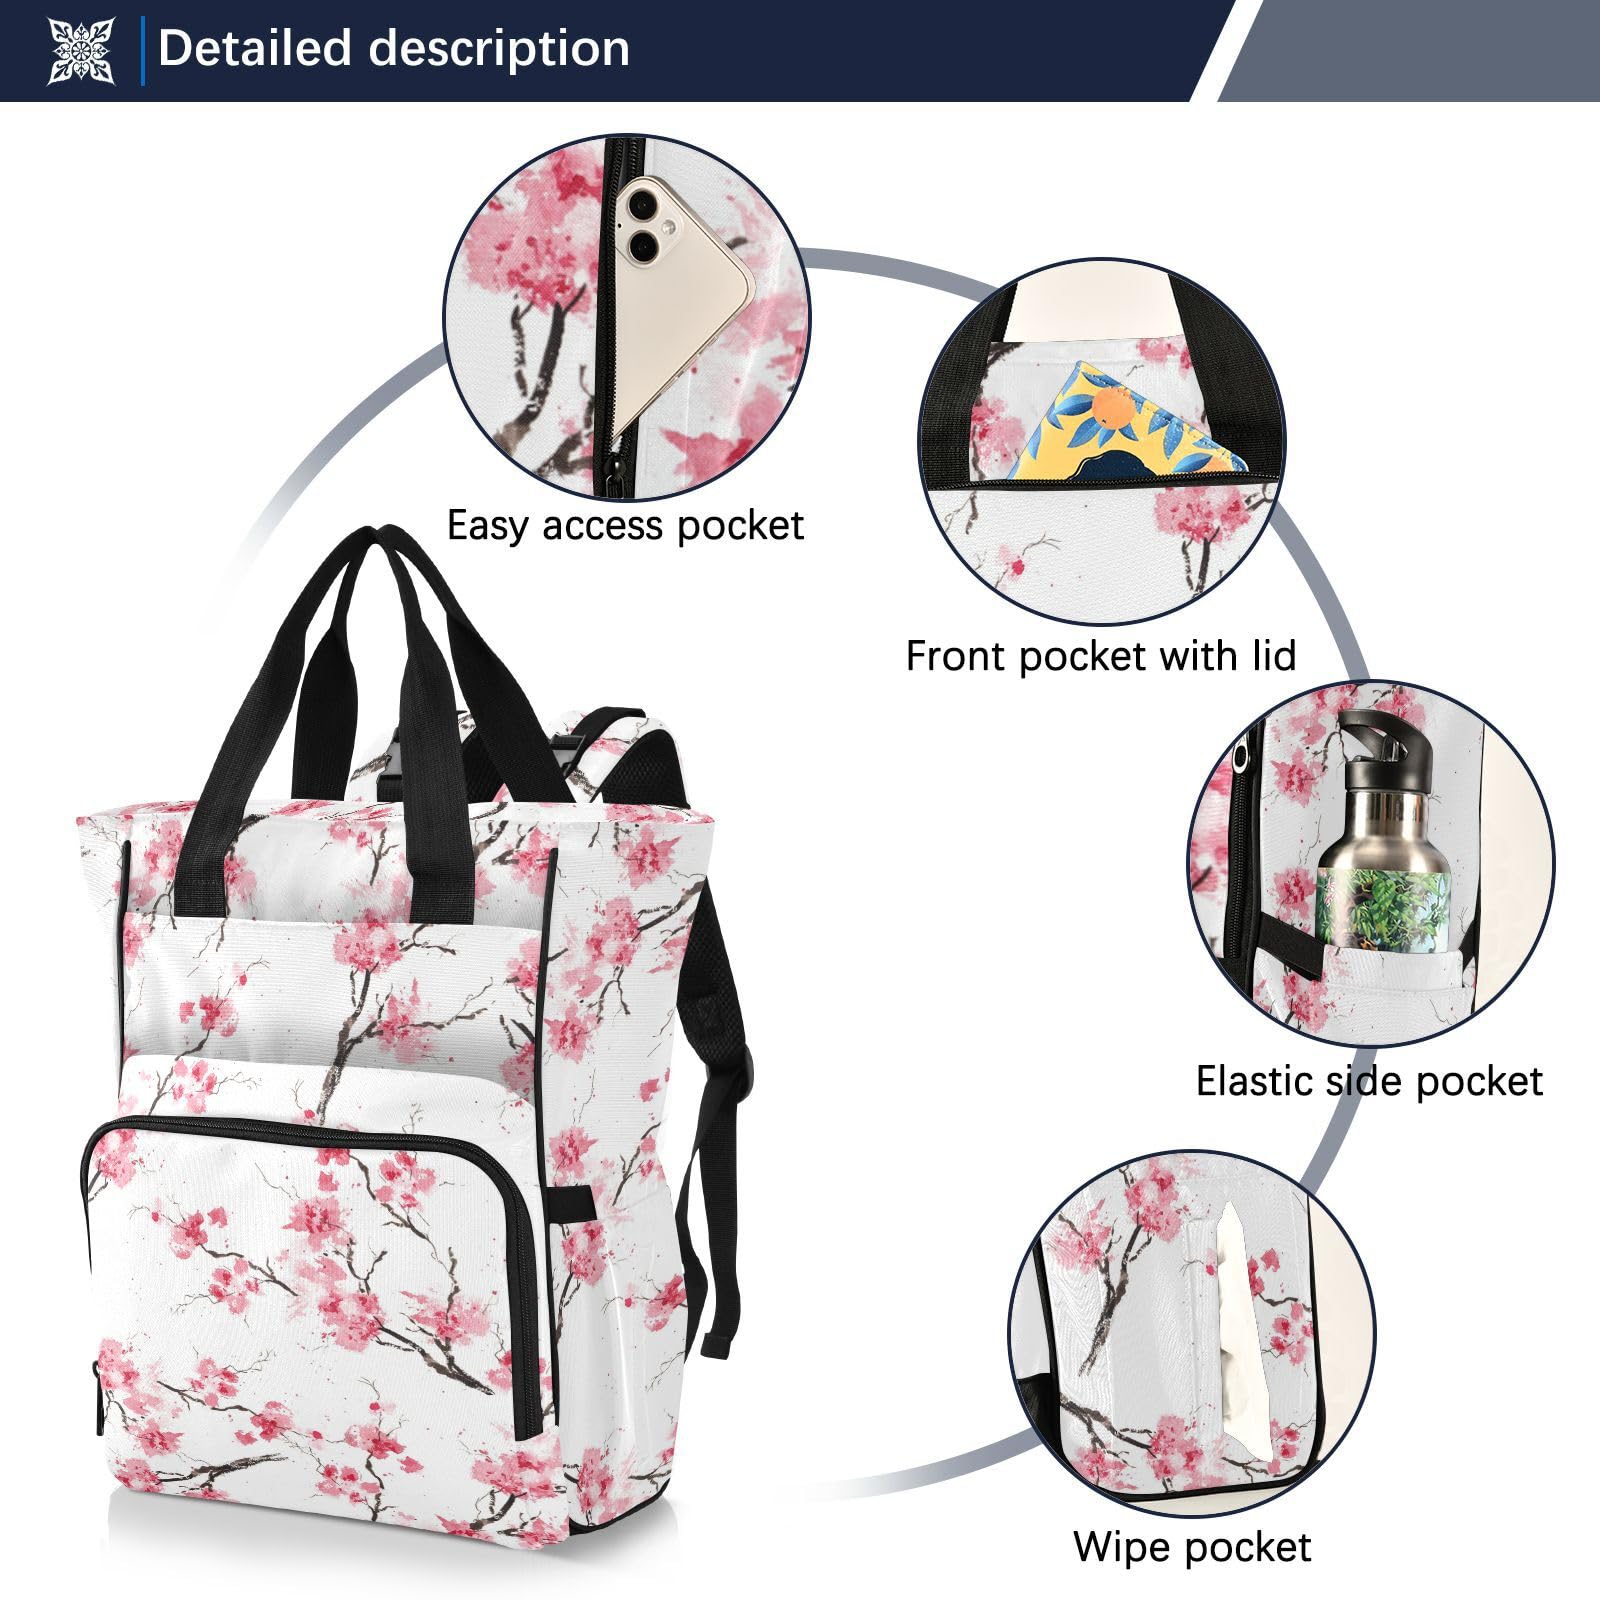 innewgogo Cherry Blossom Diaper Bag Backpack for Men Women Large Capacity Baby Changing Totes with Three Pockets Multifunction Baby Essentials for Picnicking Playing